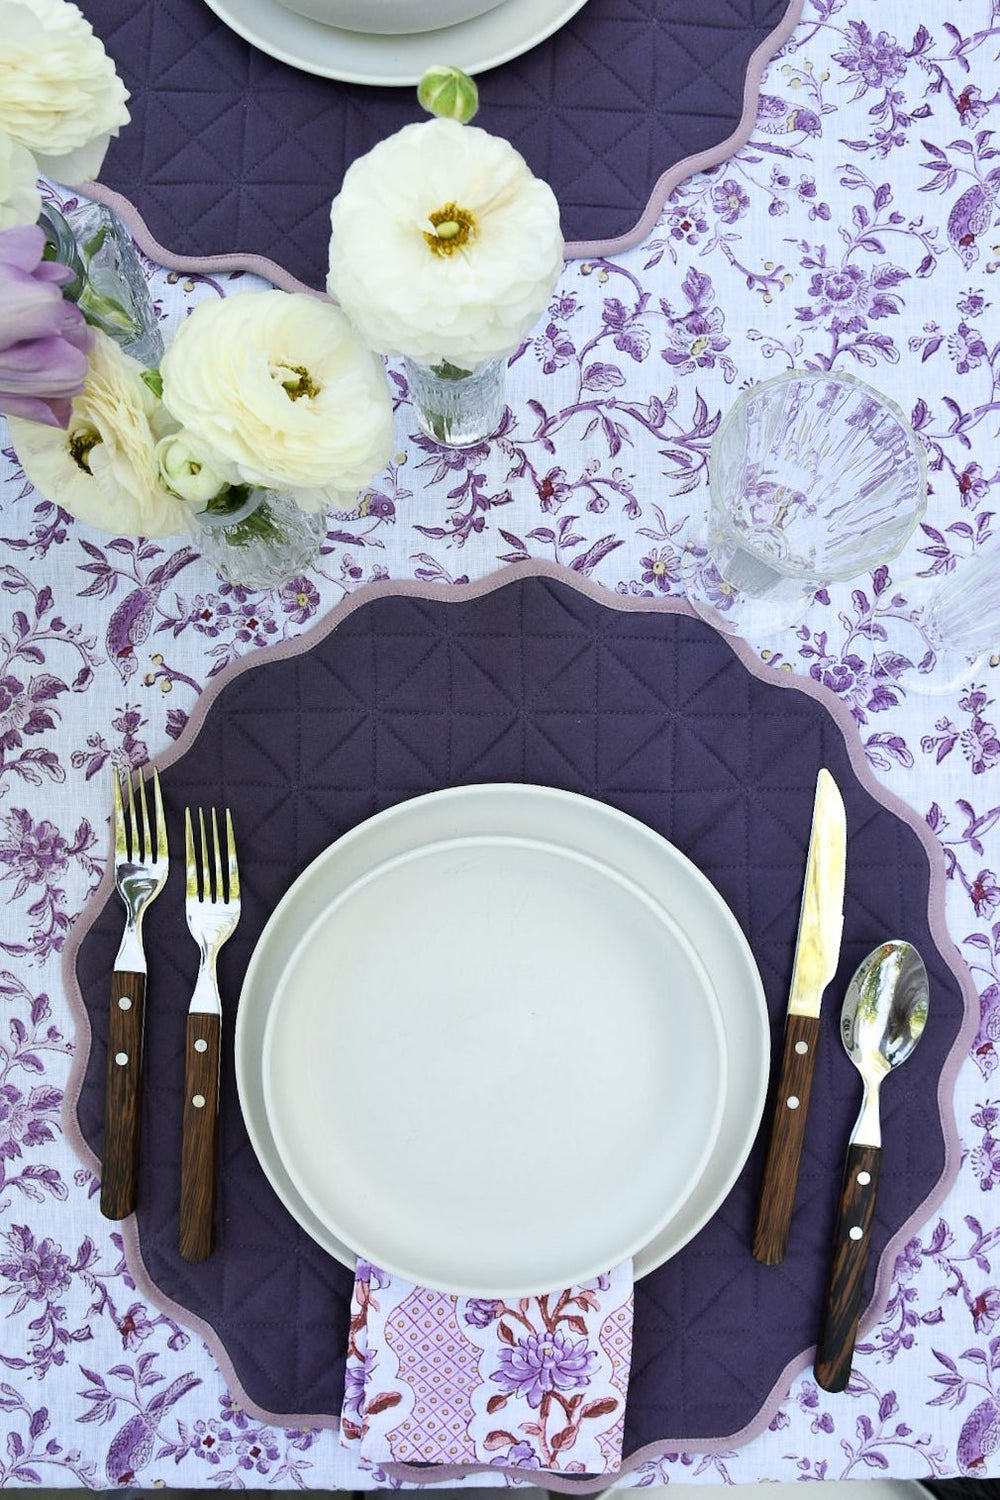 Violet Quilted Scallop Placemat | Katel Home